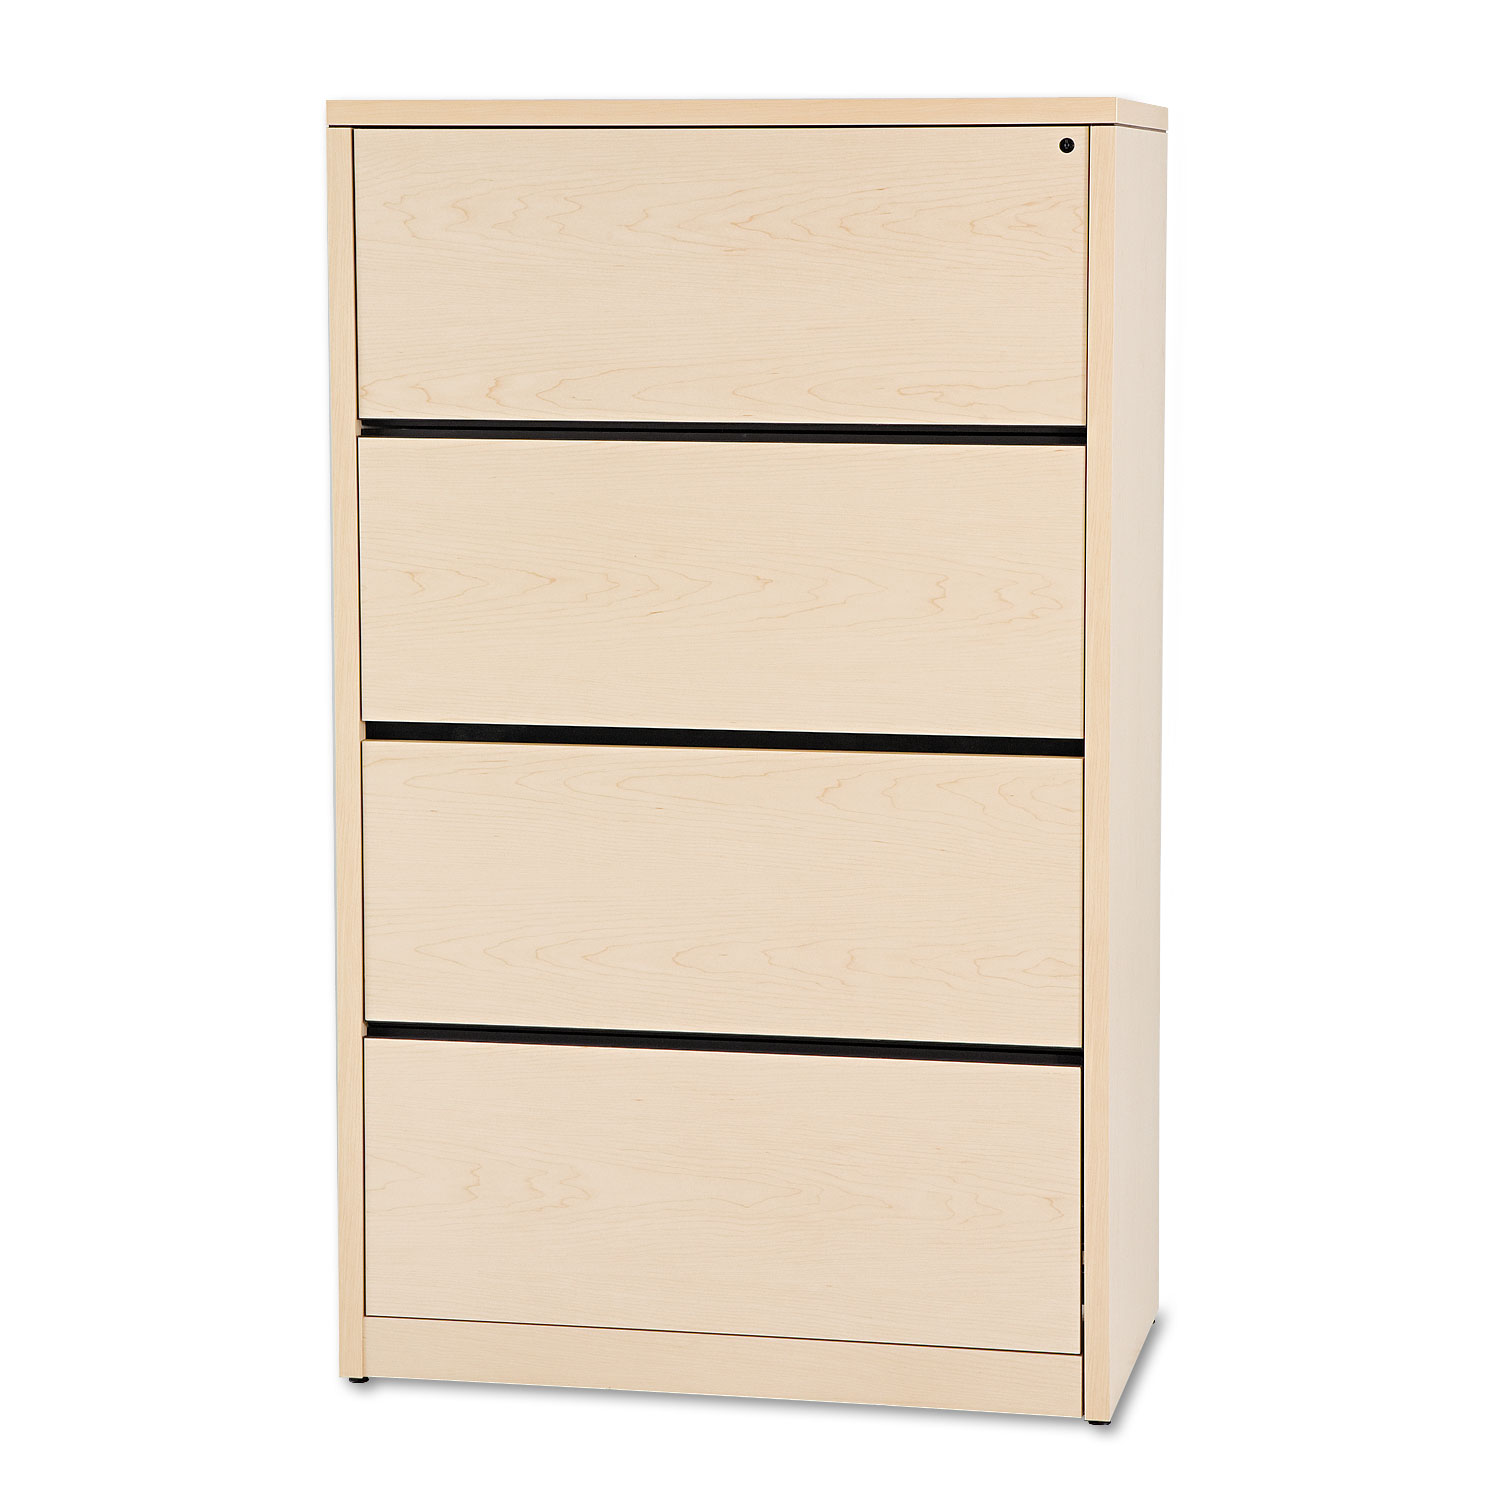 10500 Series Four-Drawer Lateral File, 36w x 20d x 59-1/8h, Natural Maple